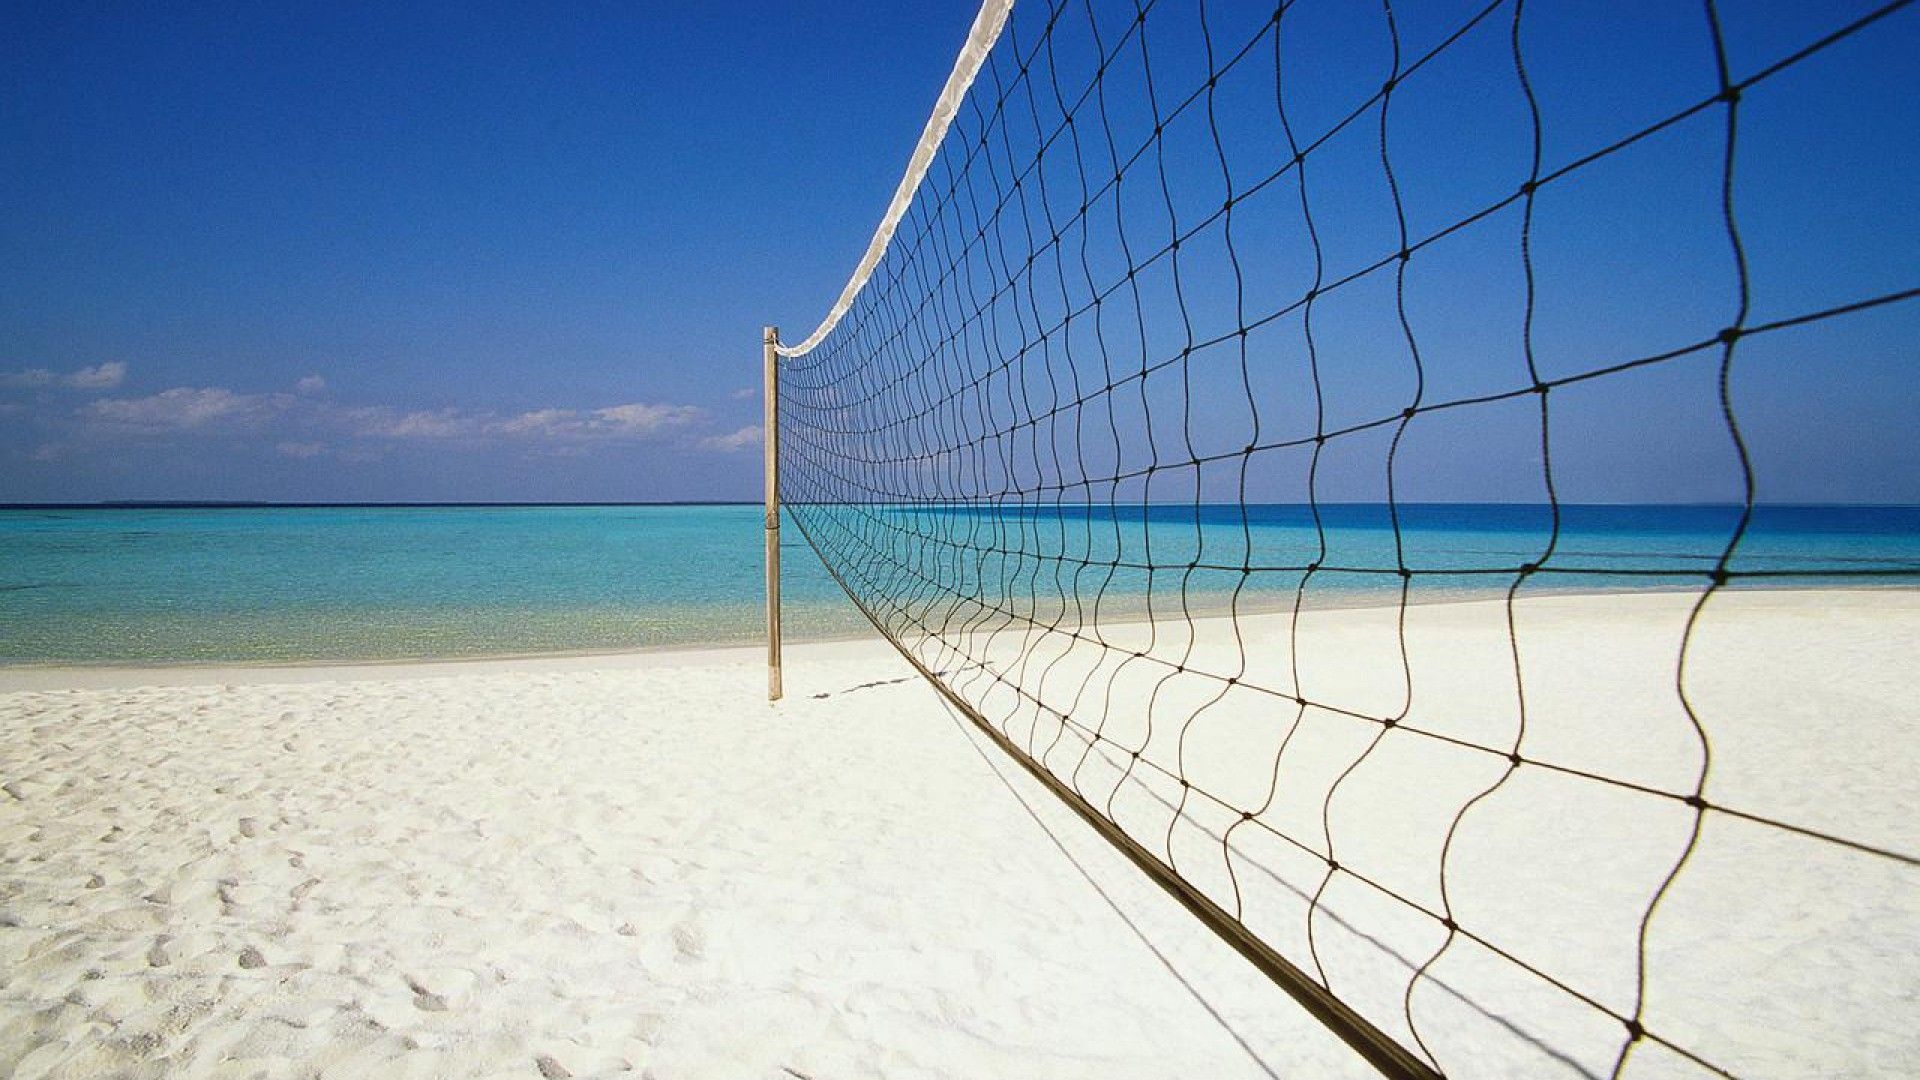 Beach Volleyball: Beach Volleyball Court For Amateurs and Beginners, Volleyball Net by the Seashore. 1920x1080 Full HD Wallpaper.